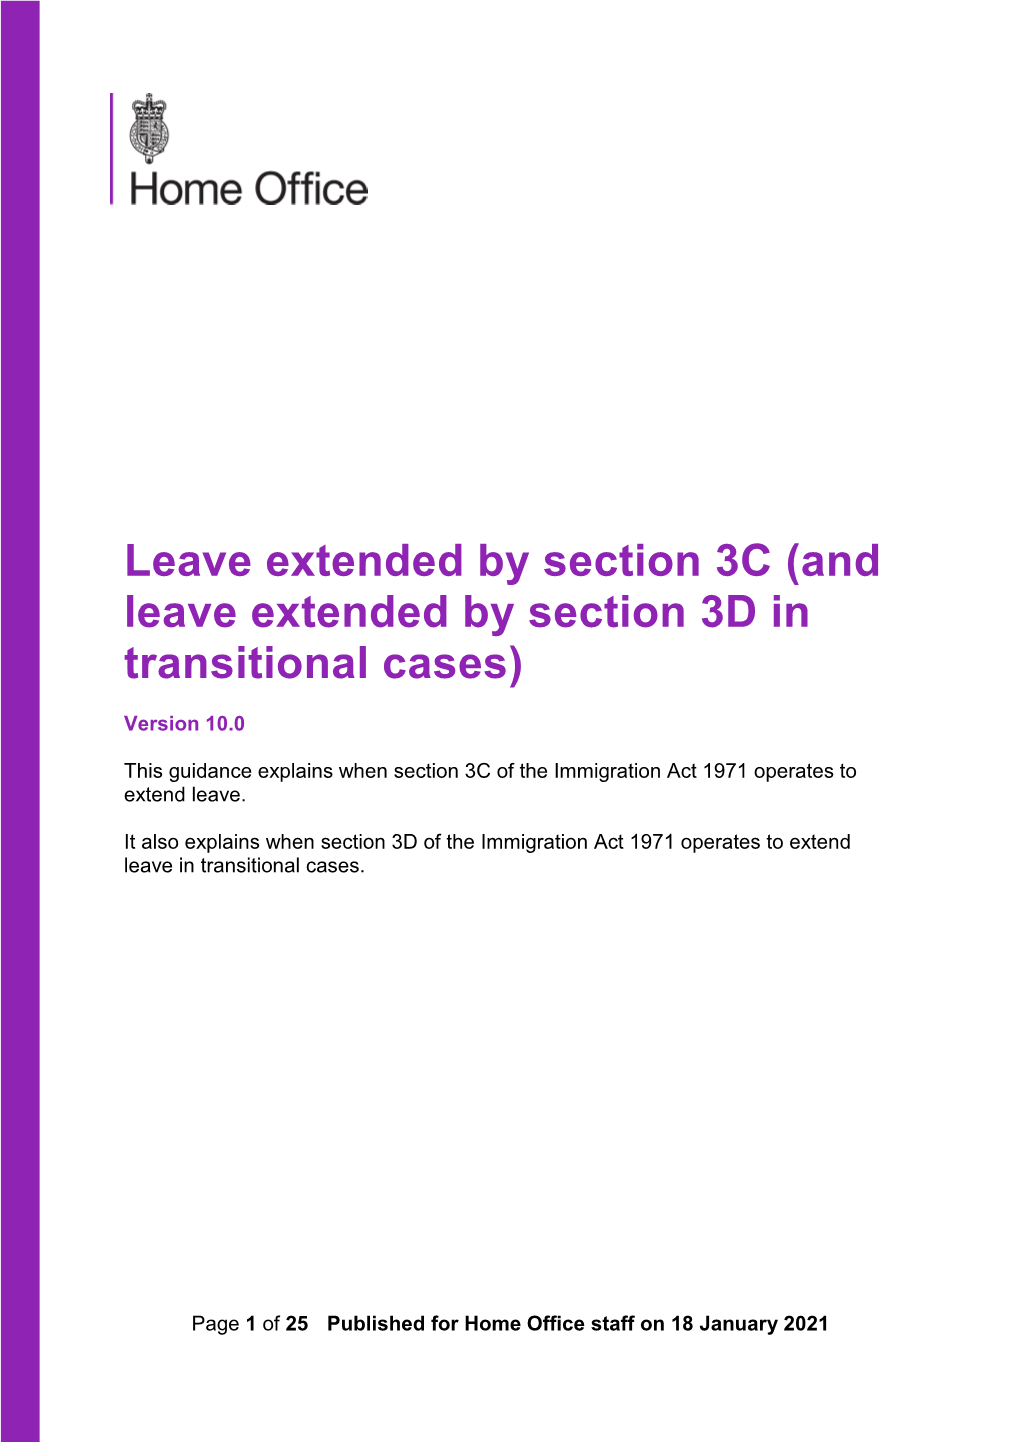 Leave Extended by Section 3C (And Leave Extended by Section 3D in Transitional Cases)